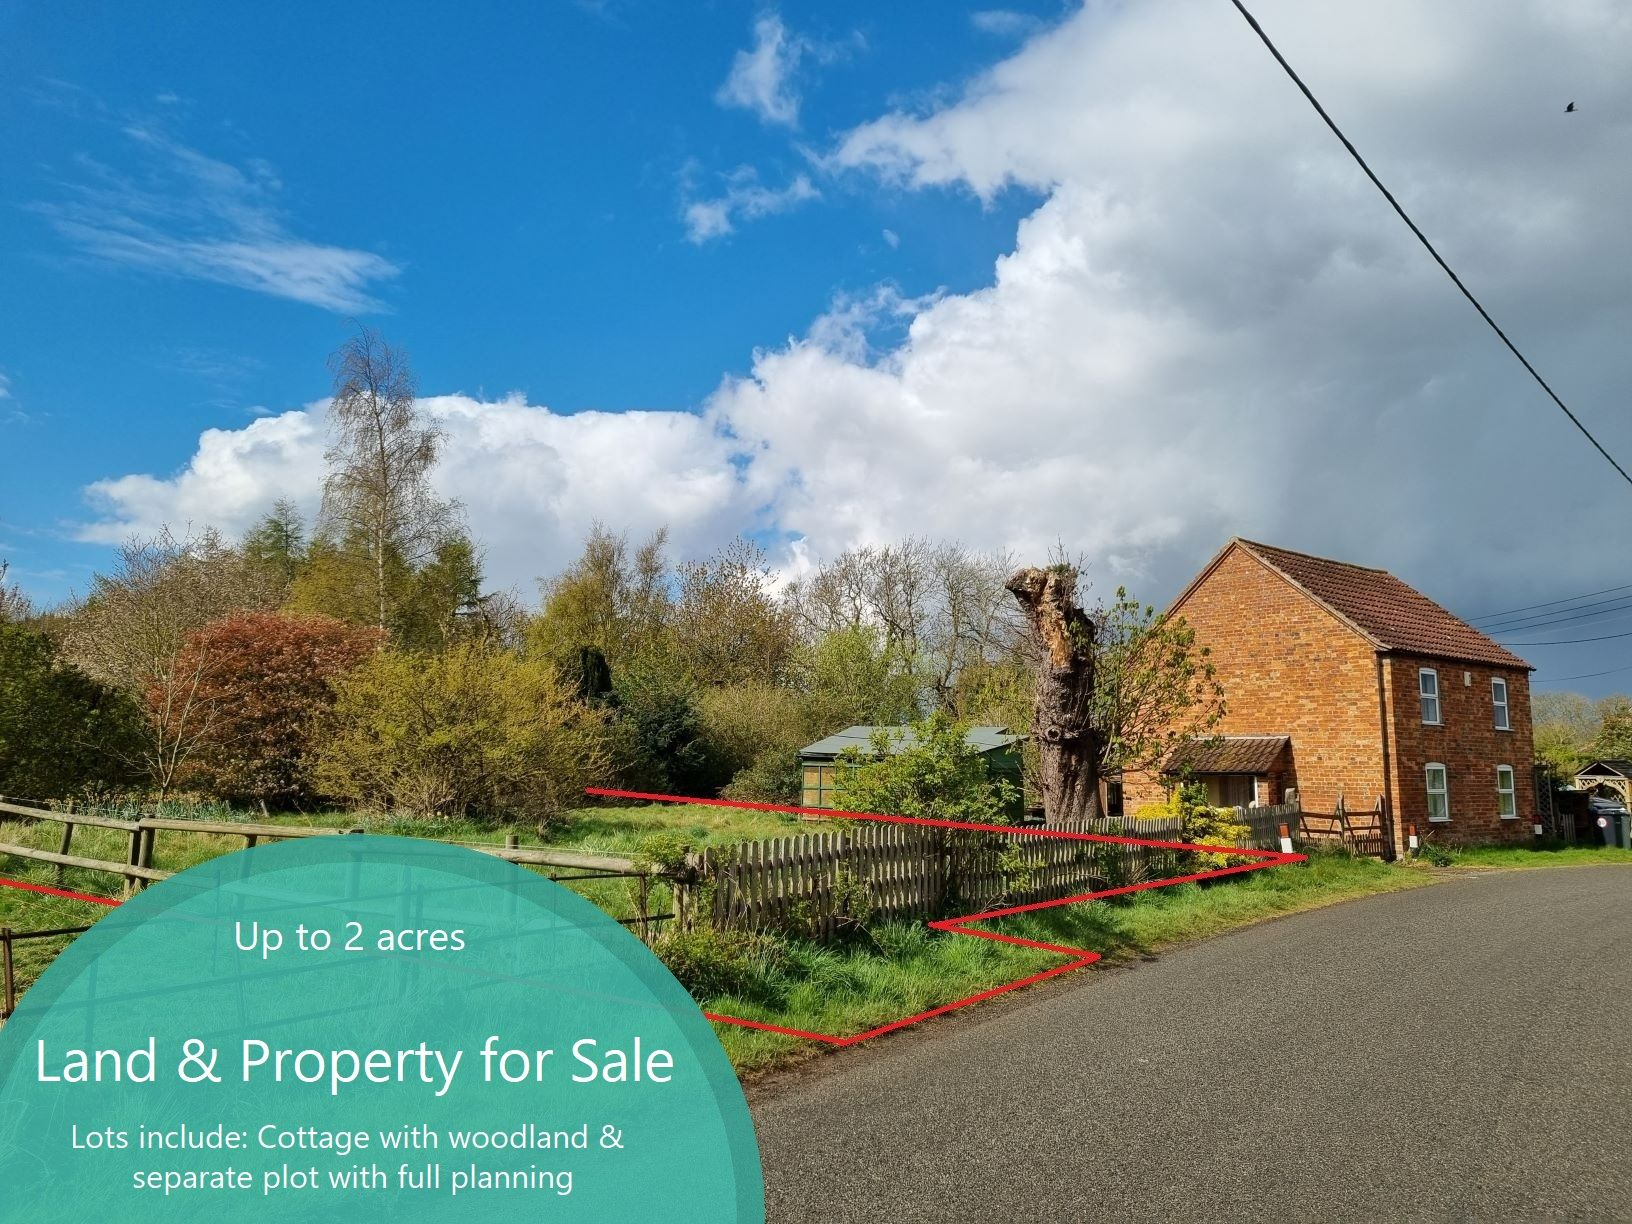 Land and Property for sale - Raithby near Spilsby Lincolnshire - close to the Wolds AONB. 